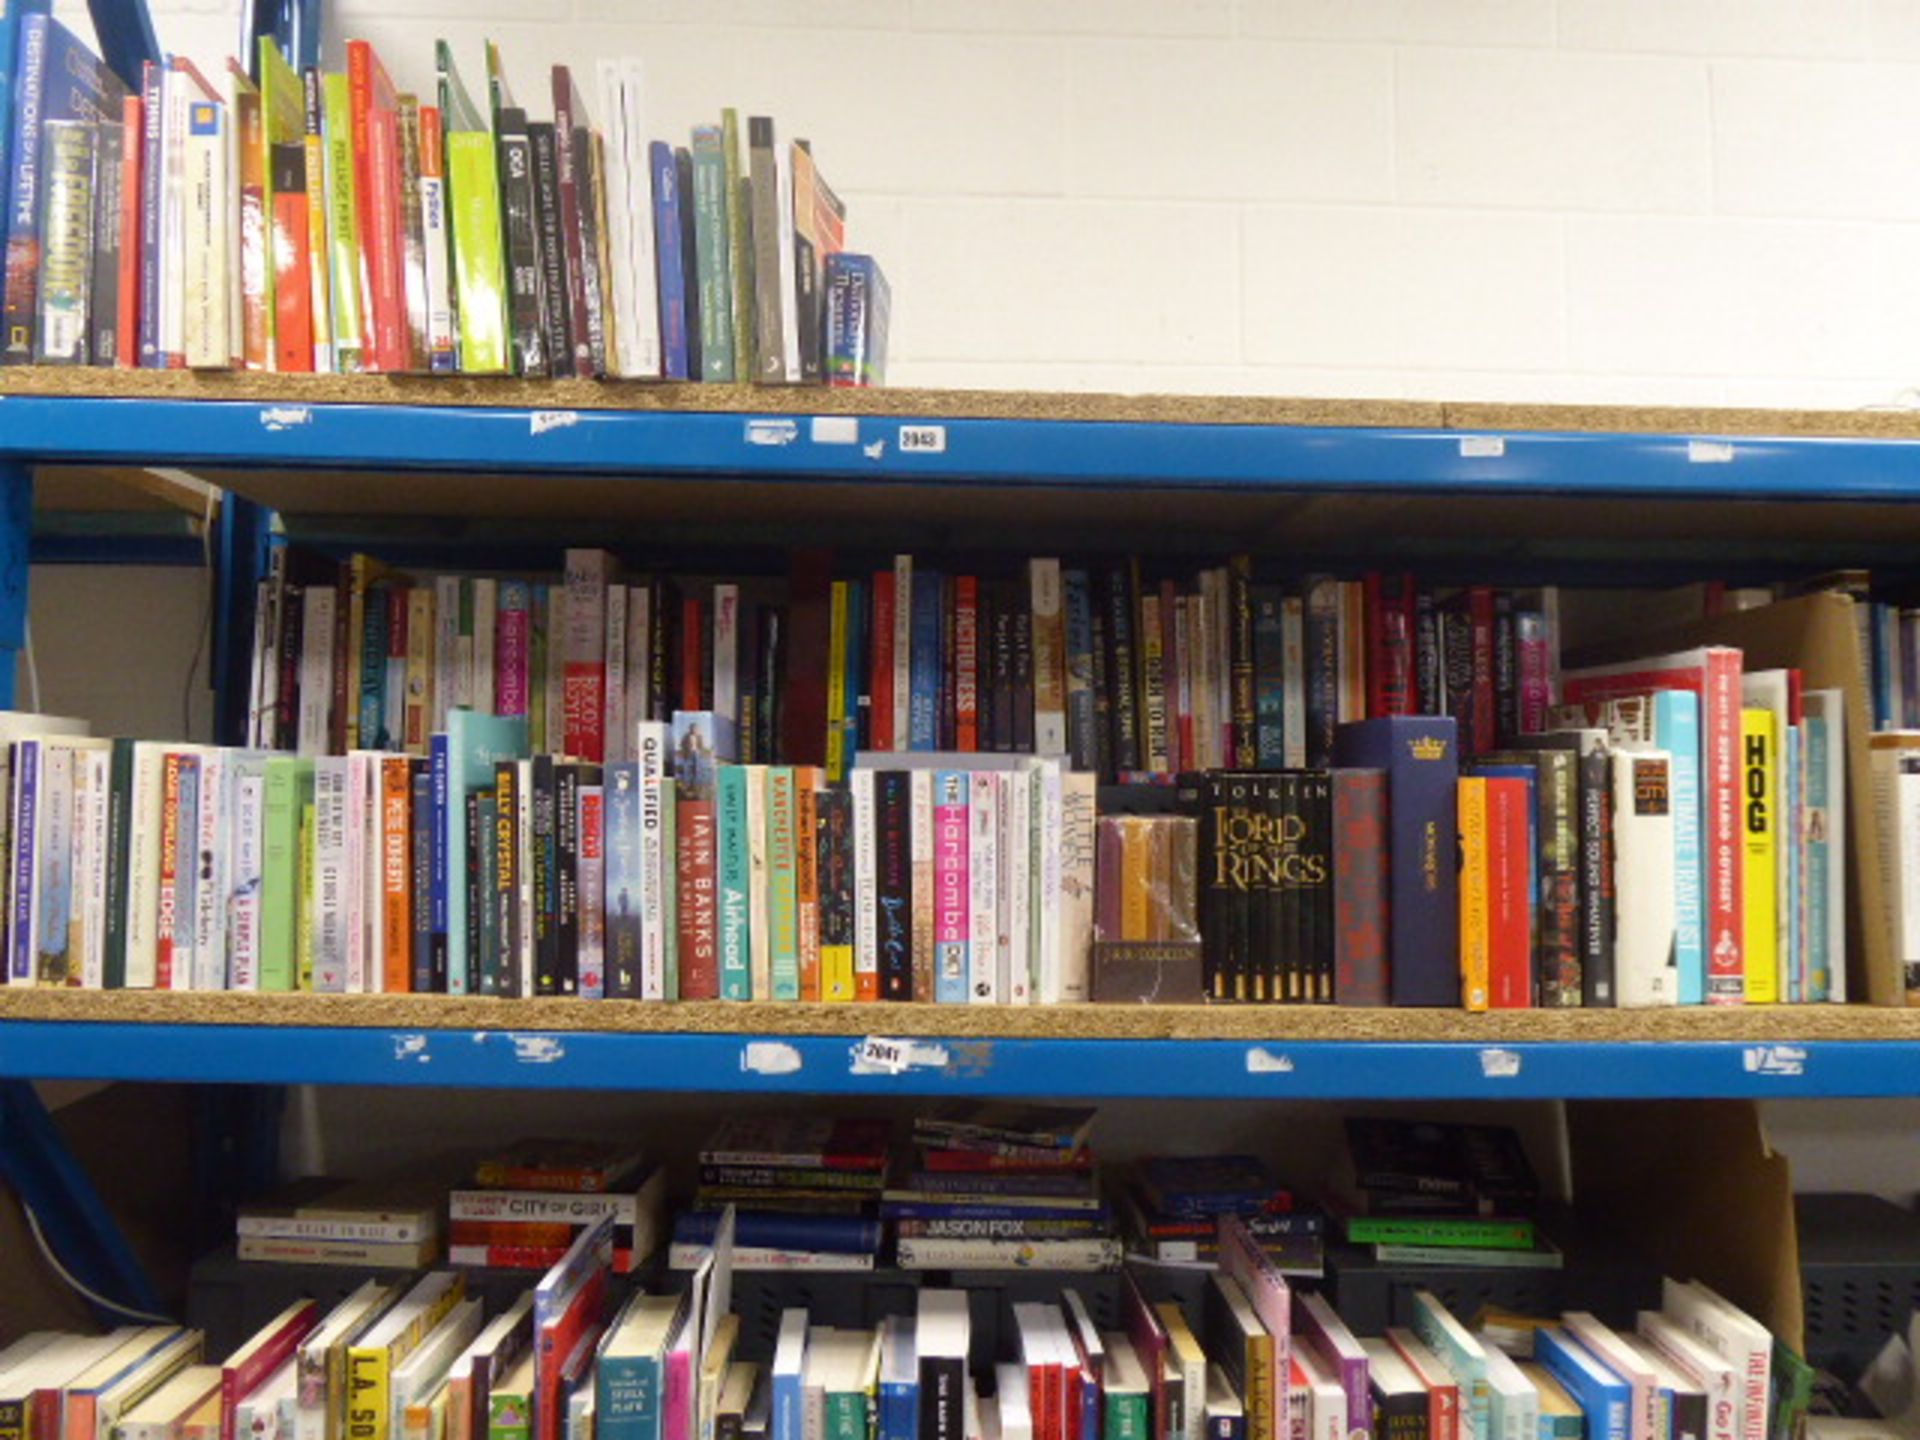 Shelf containing a selection of hard back and paperback novels, reference and other books.